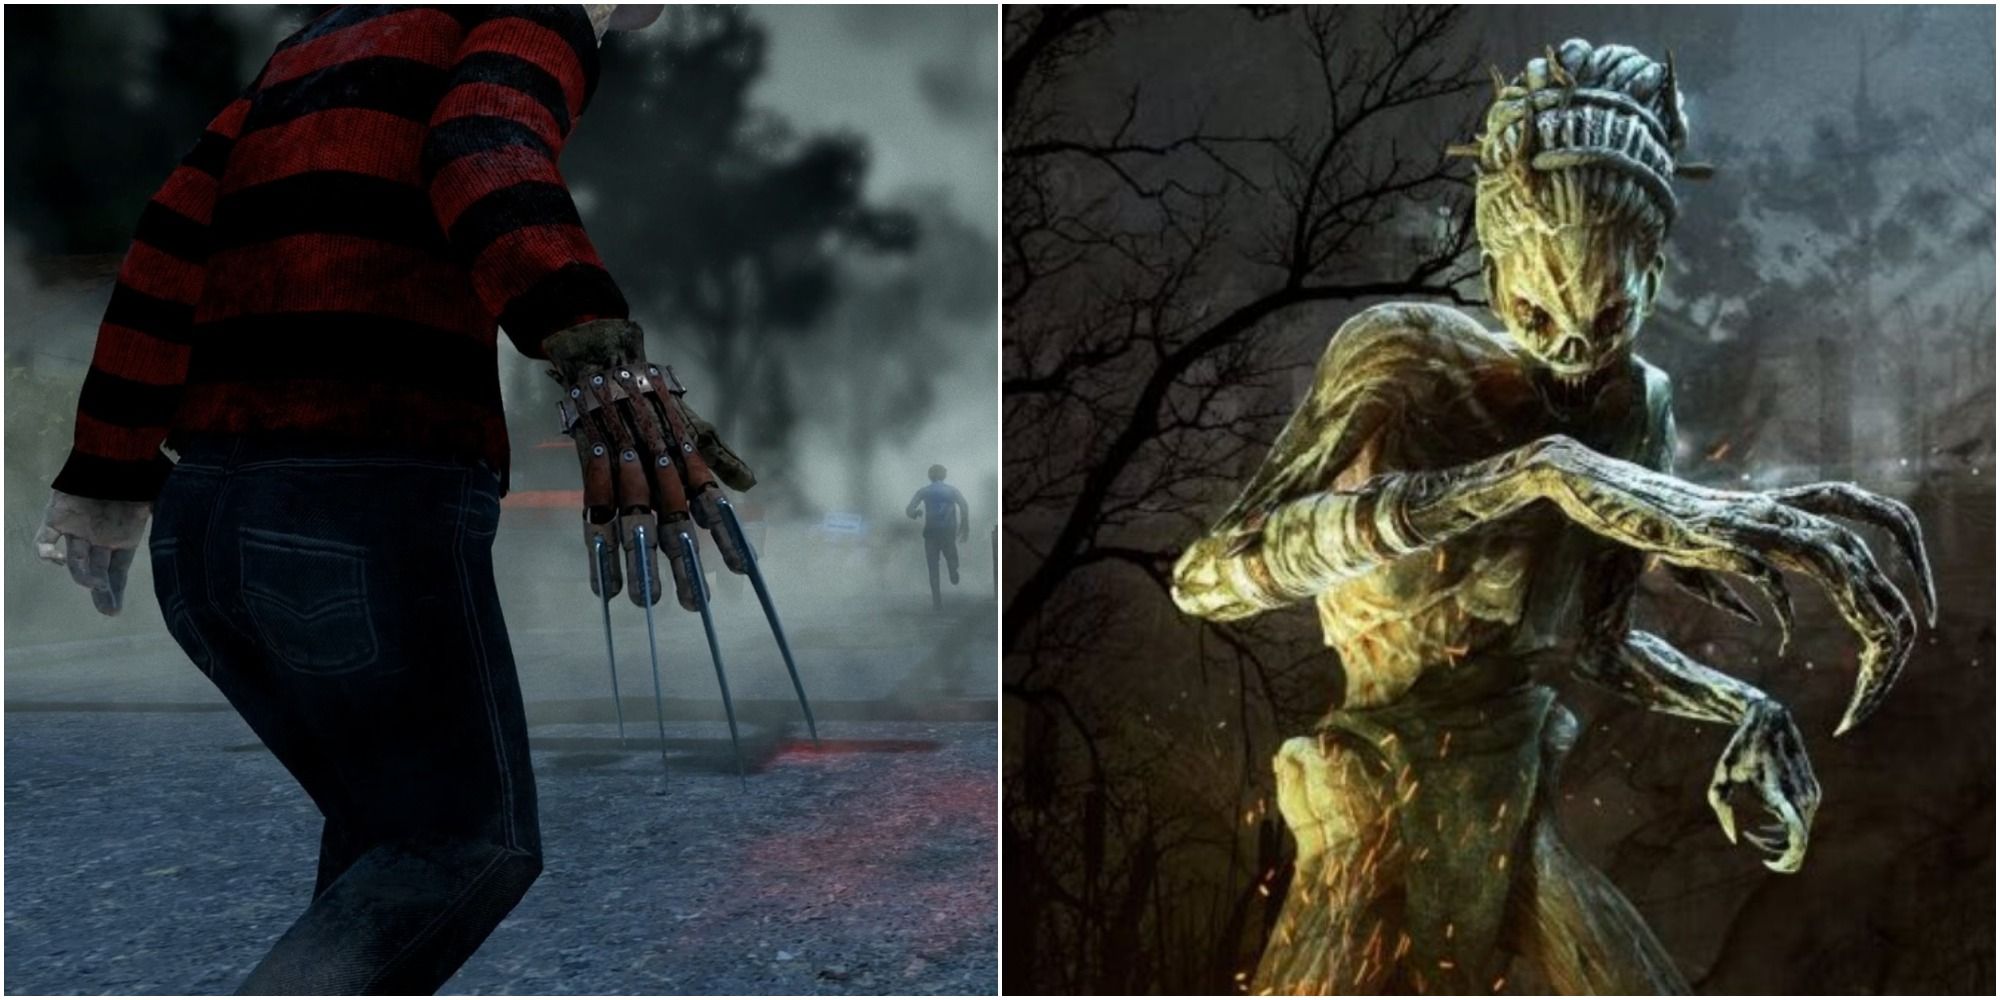 The Nightmare aka Freddy Kreuger and The Hag in Dead By Daylight